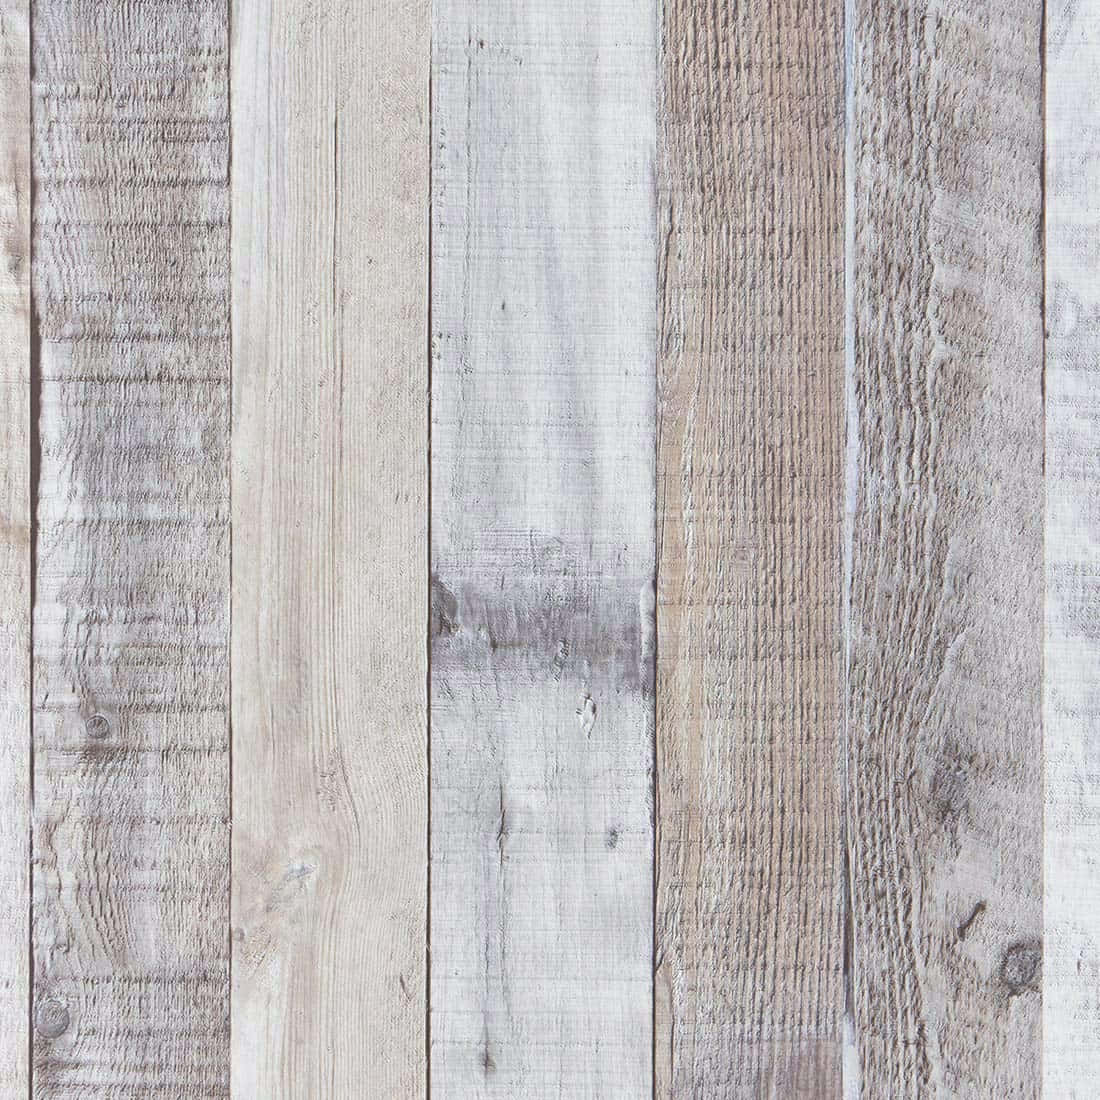 A Close Up Of A Wooden Wall With White And Gray Stripes